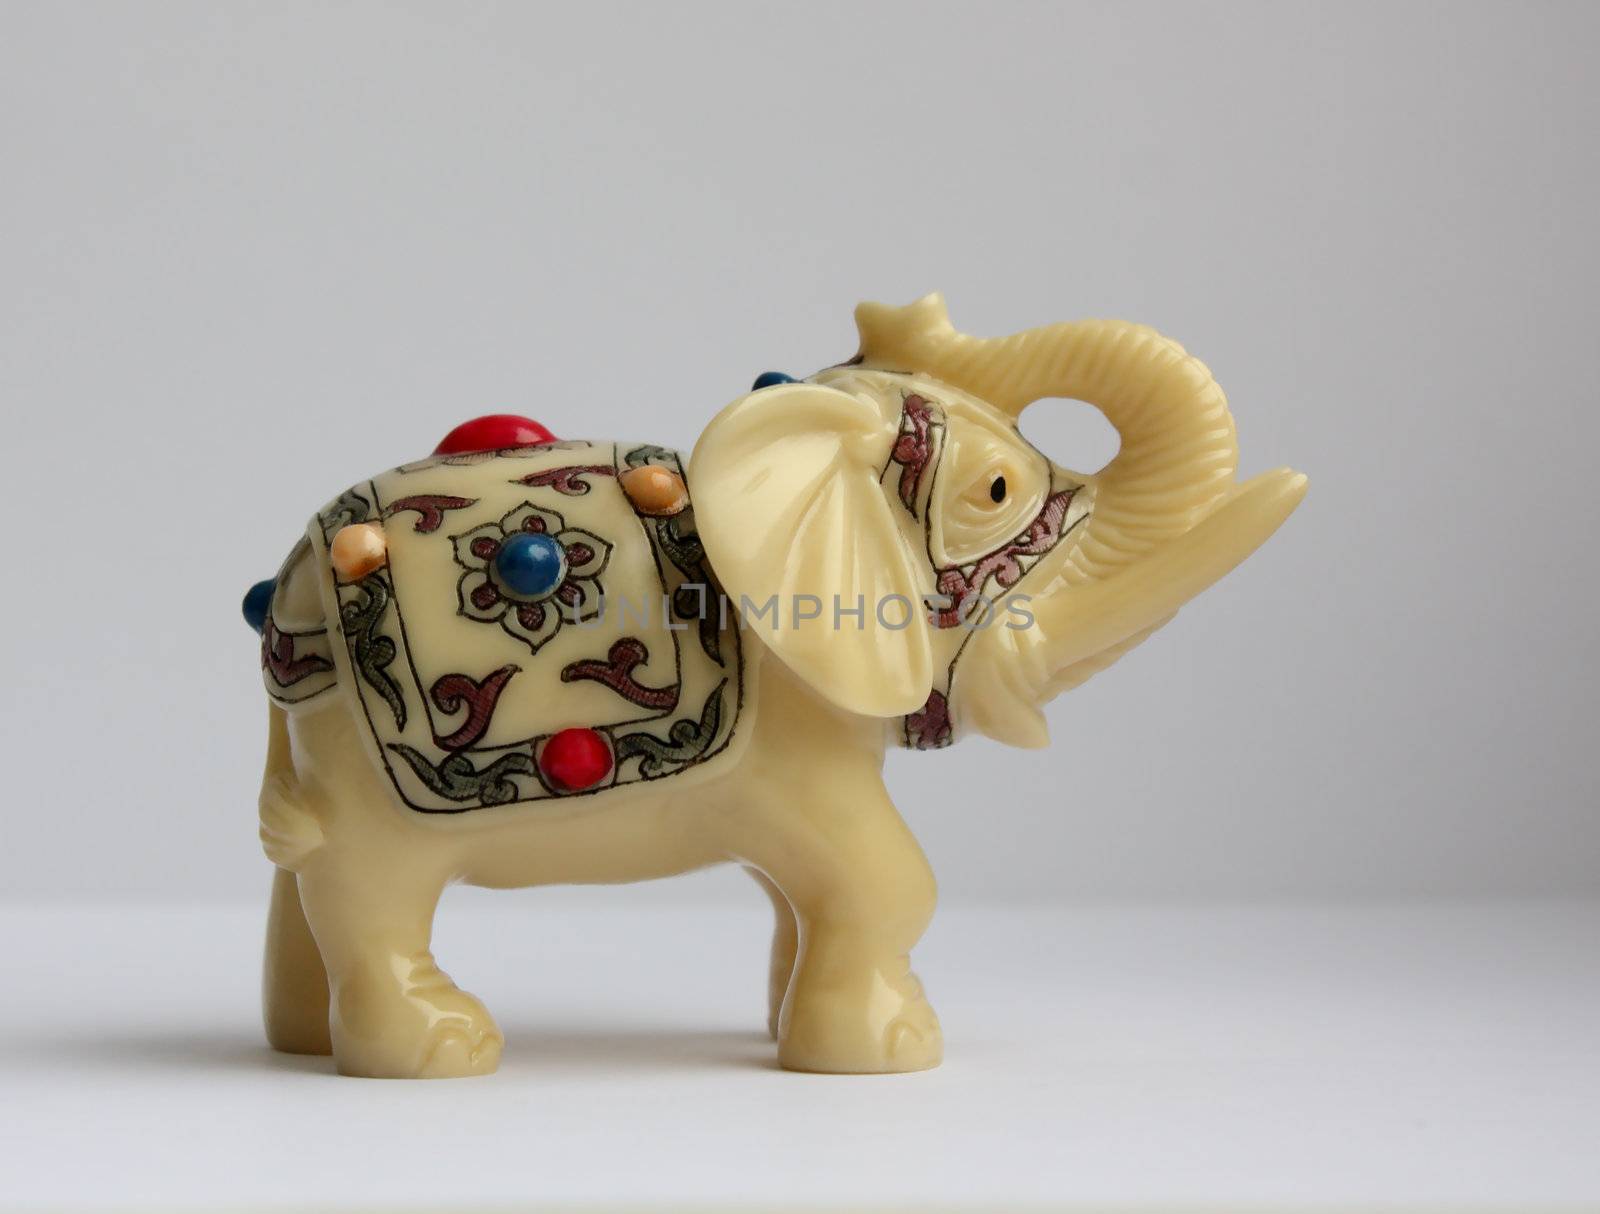 Ivory statuette of elephant from Nepal